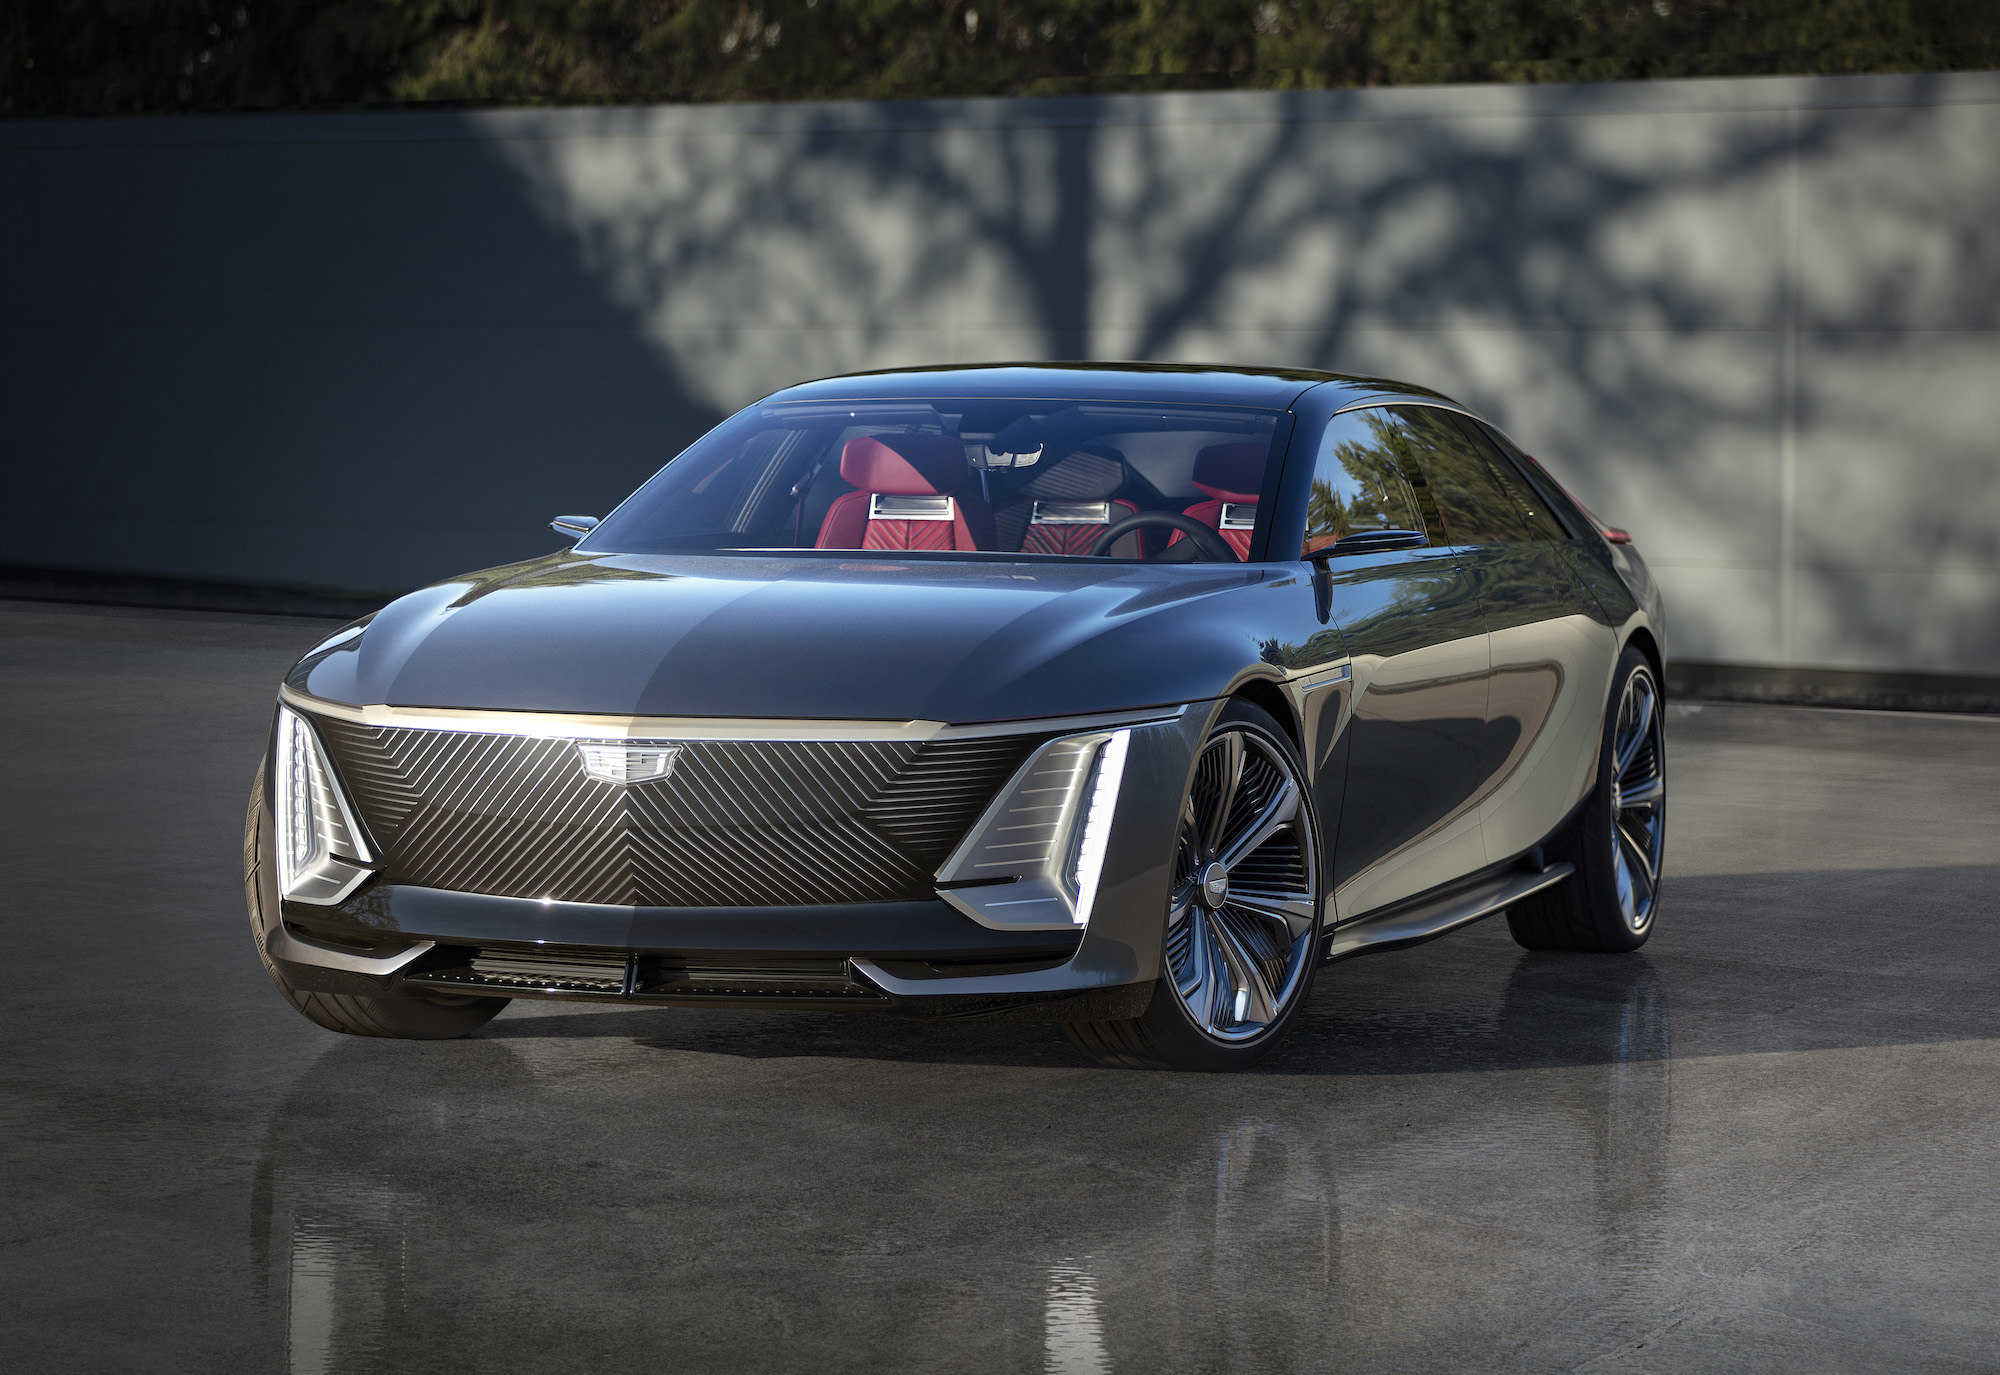 You’ll likely never drive Cadillac’s new luxury EV, and that’s okay